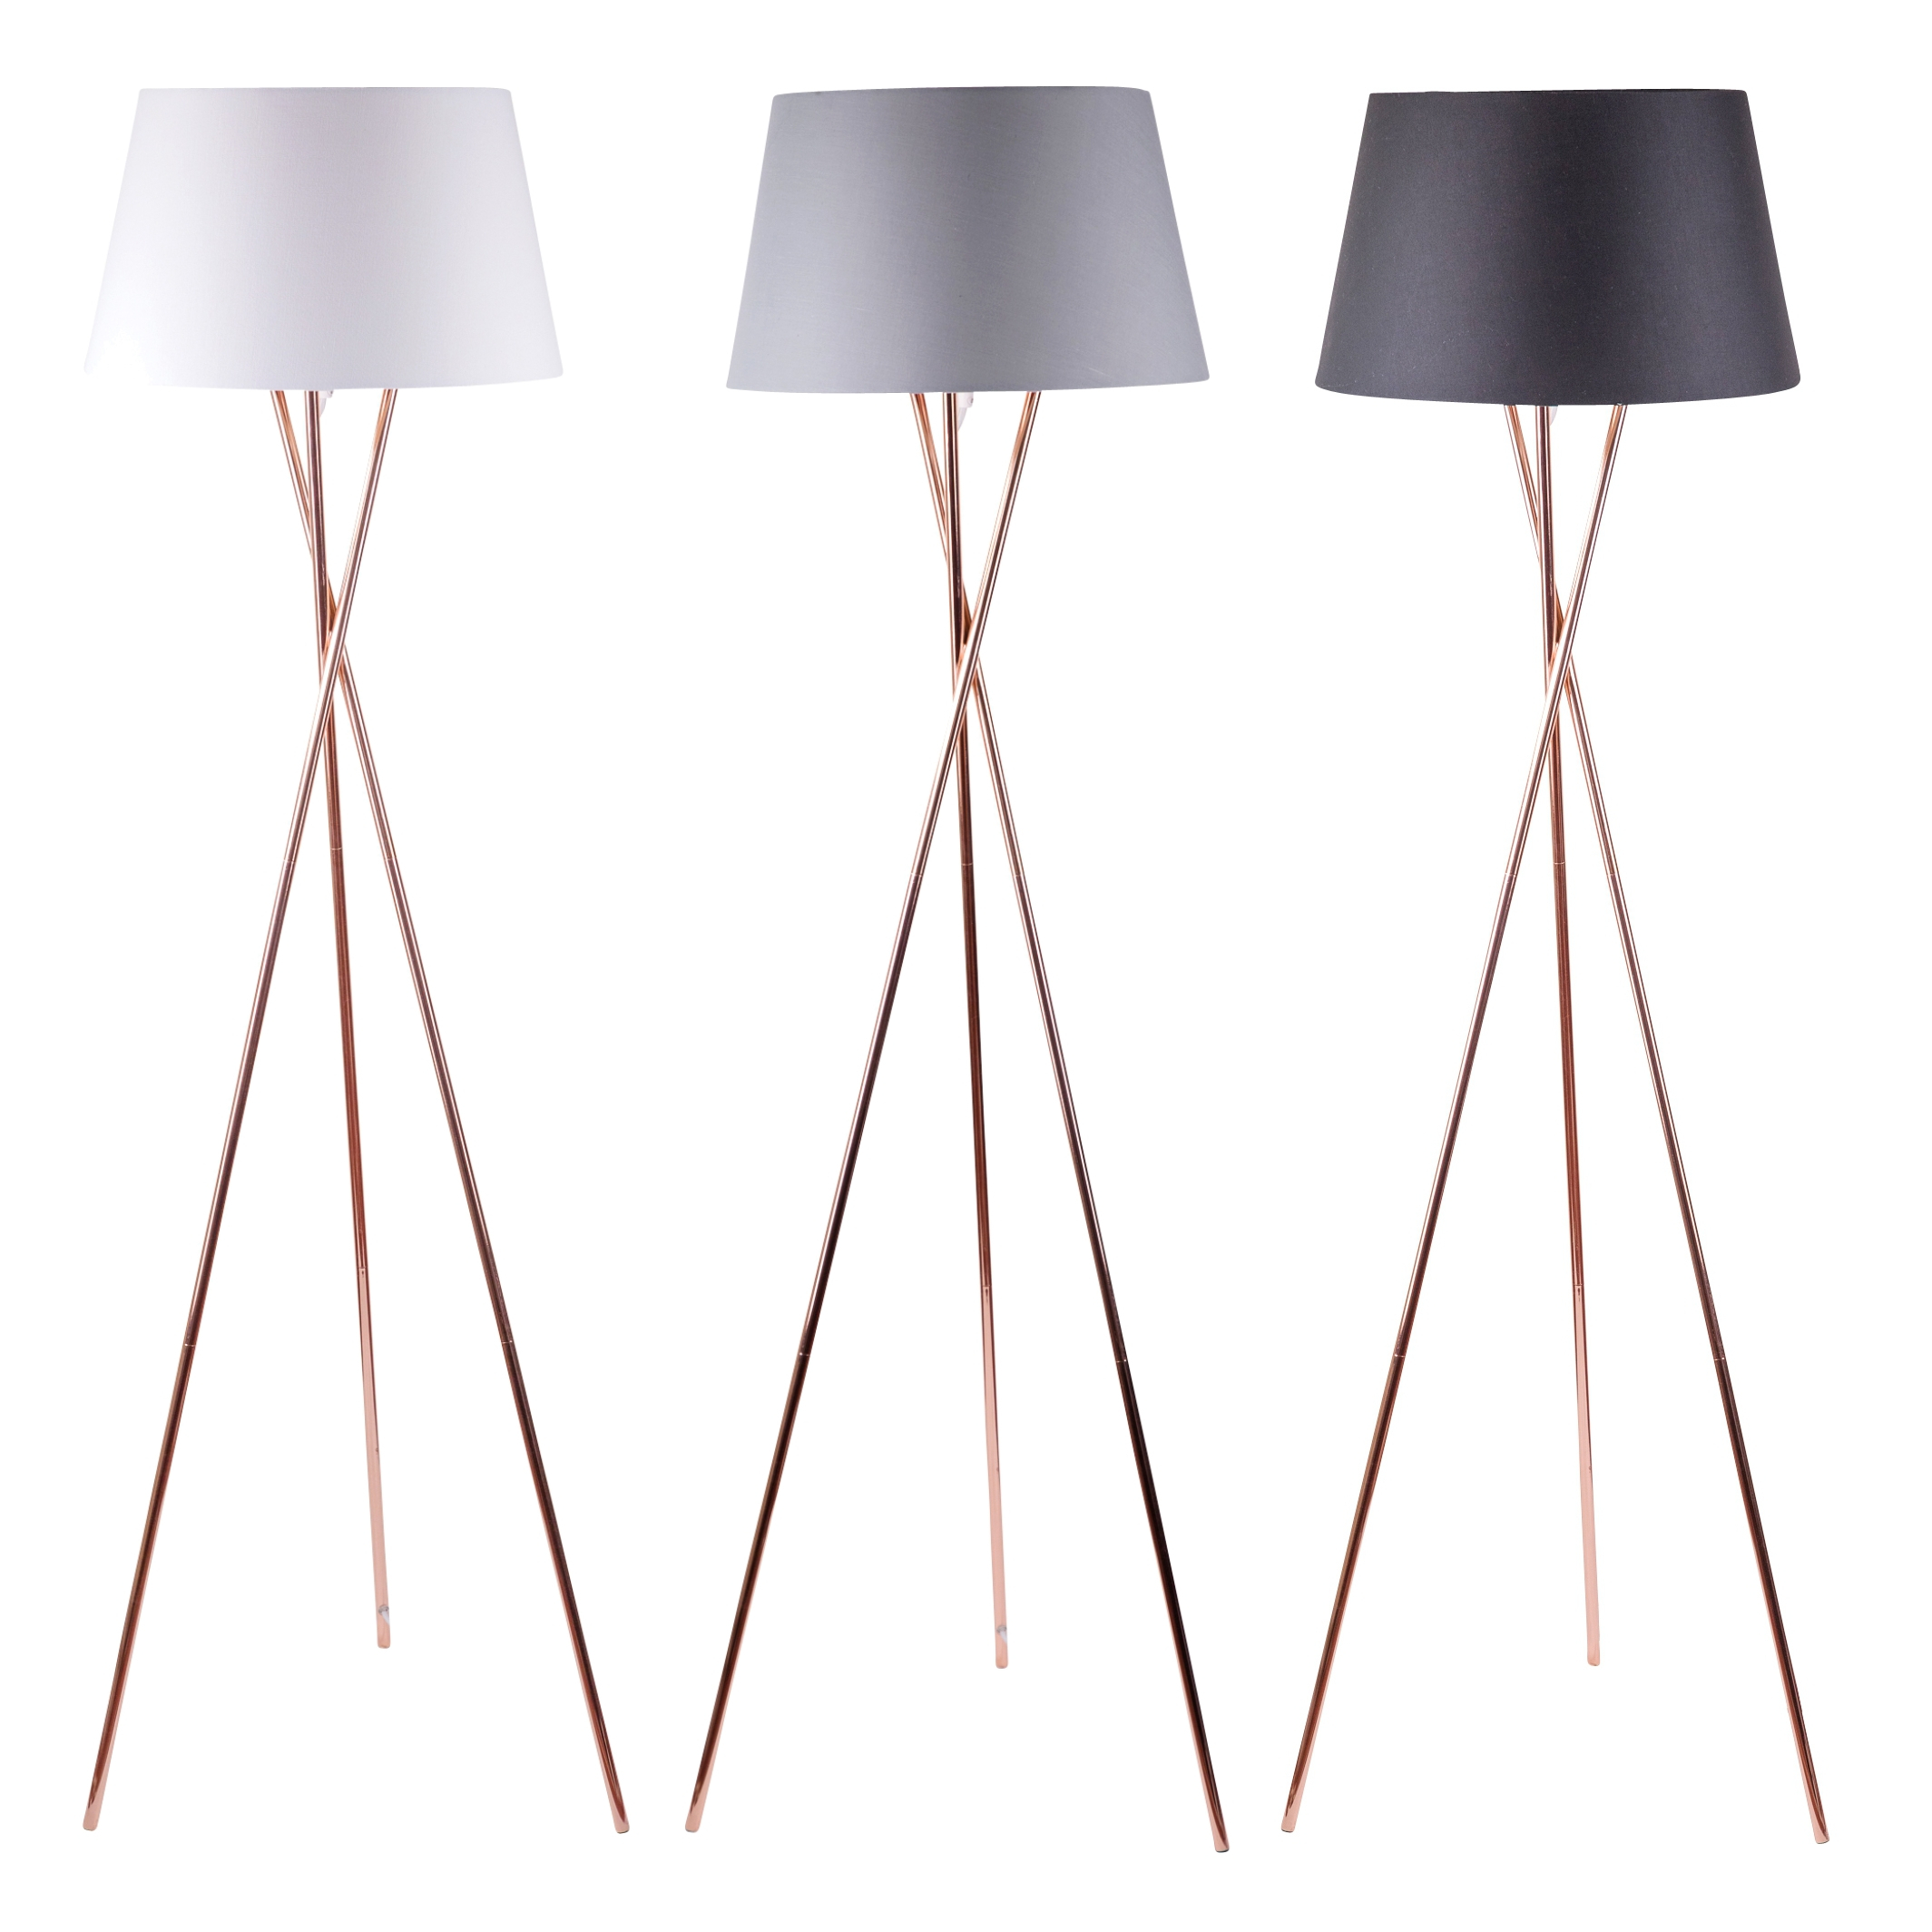 Details About Modern Copper Tripod Floor Lamp Standard Light With Grey White Or Black Shade pertaining to size 2129 X 2129